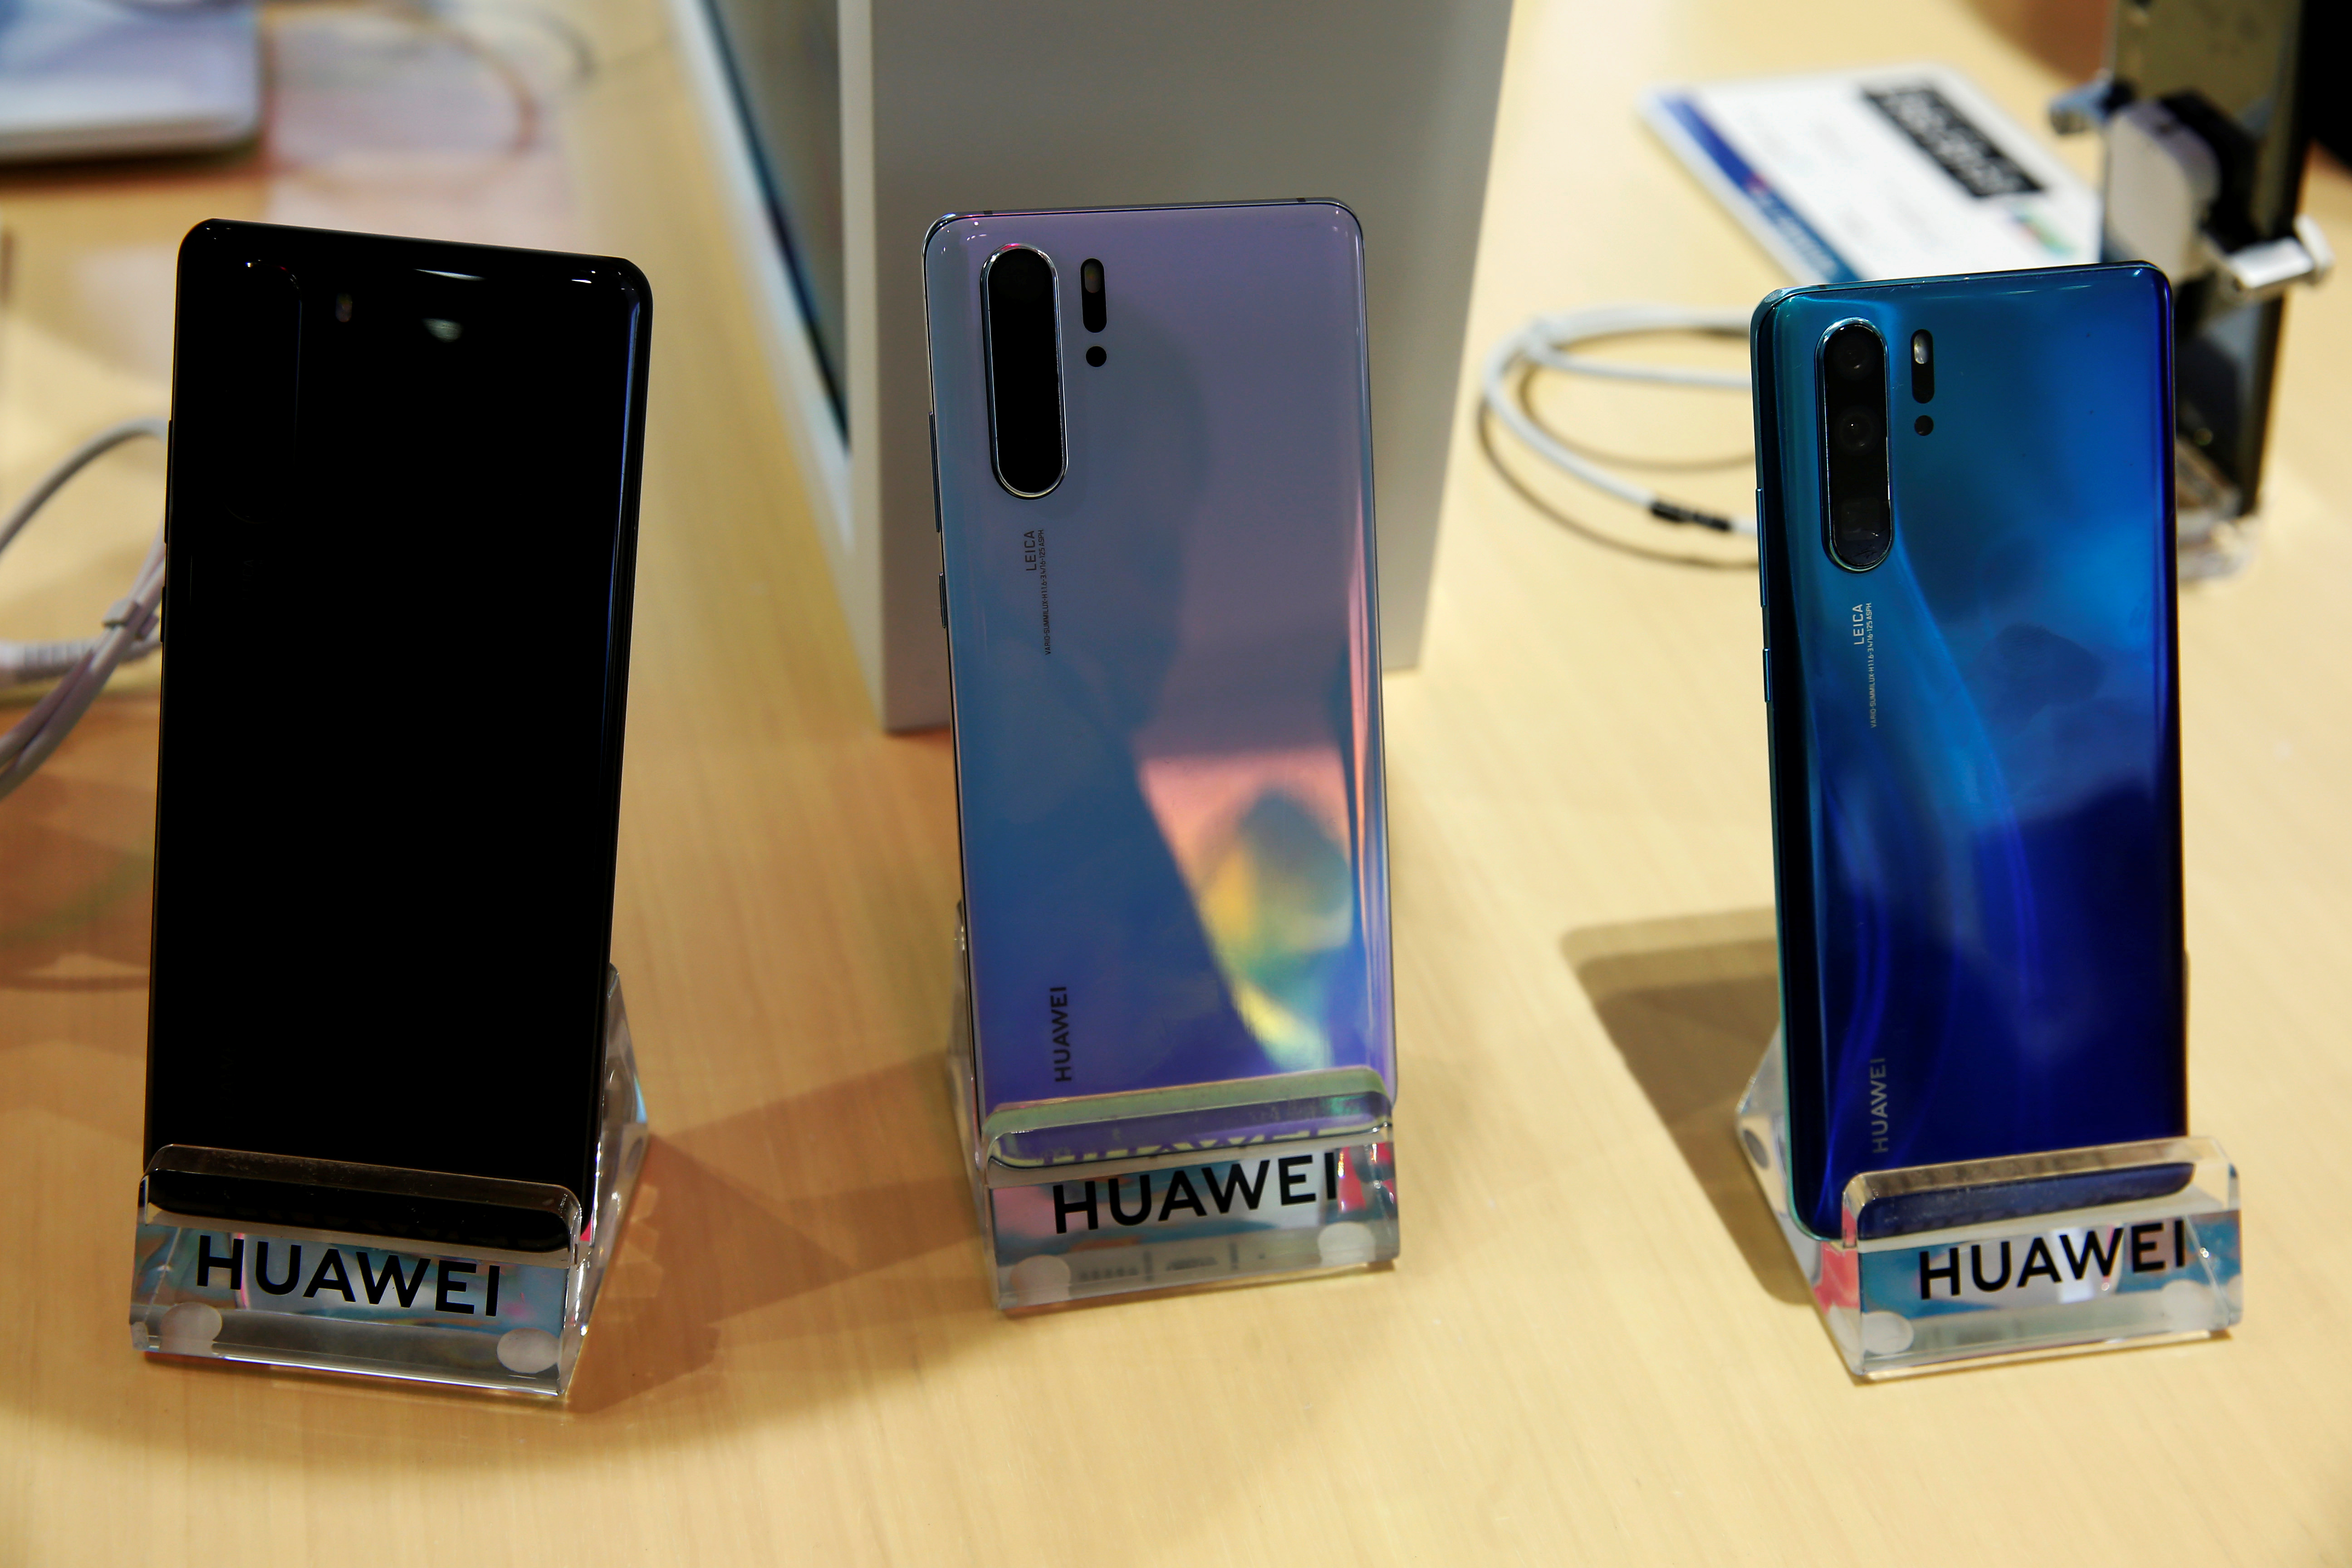 Huawei's China smartphone sales surge in Q3 as Apple declines - research  firms